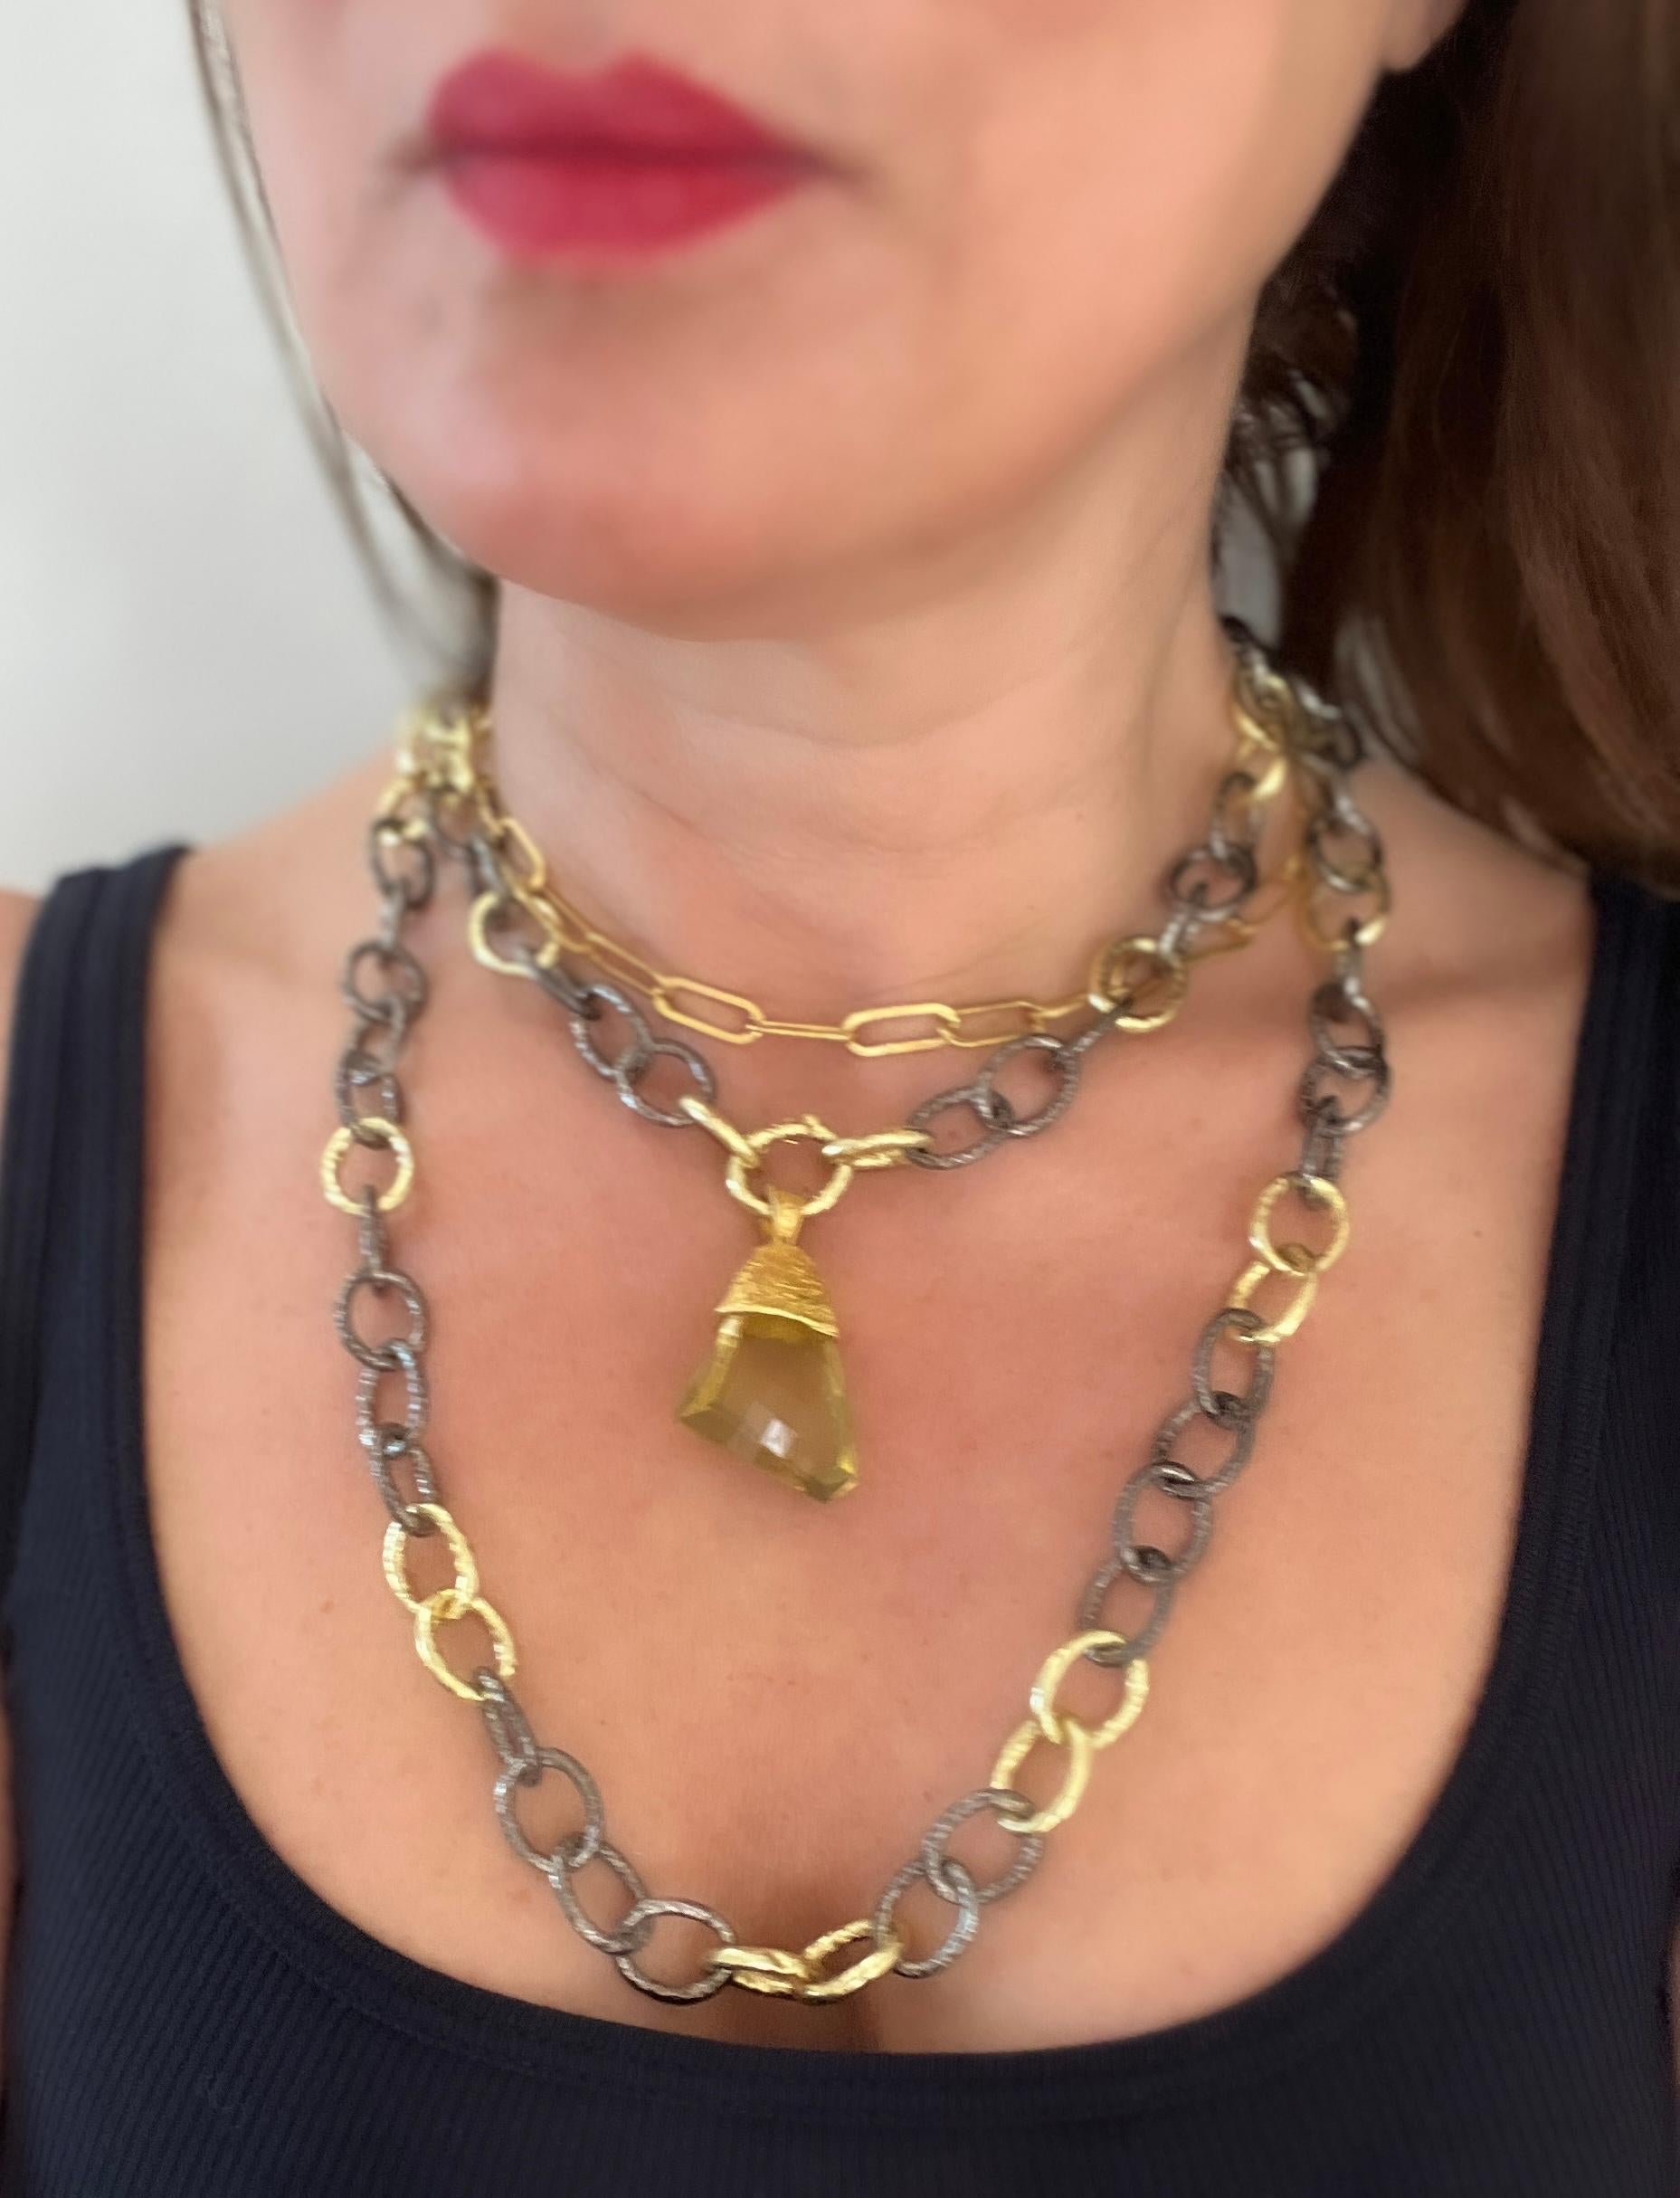 Elevate your look with this fabulous handmade thick chunky chain. The use of mixed metals takes this necklace to the next level. The handmade chain is in blackened silver and 20K gold, lightly hammered to create the perfect modern day look.